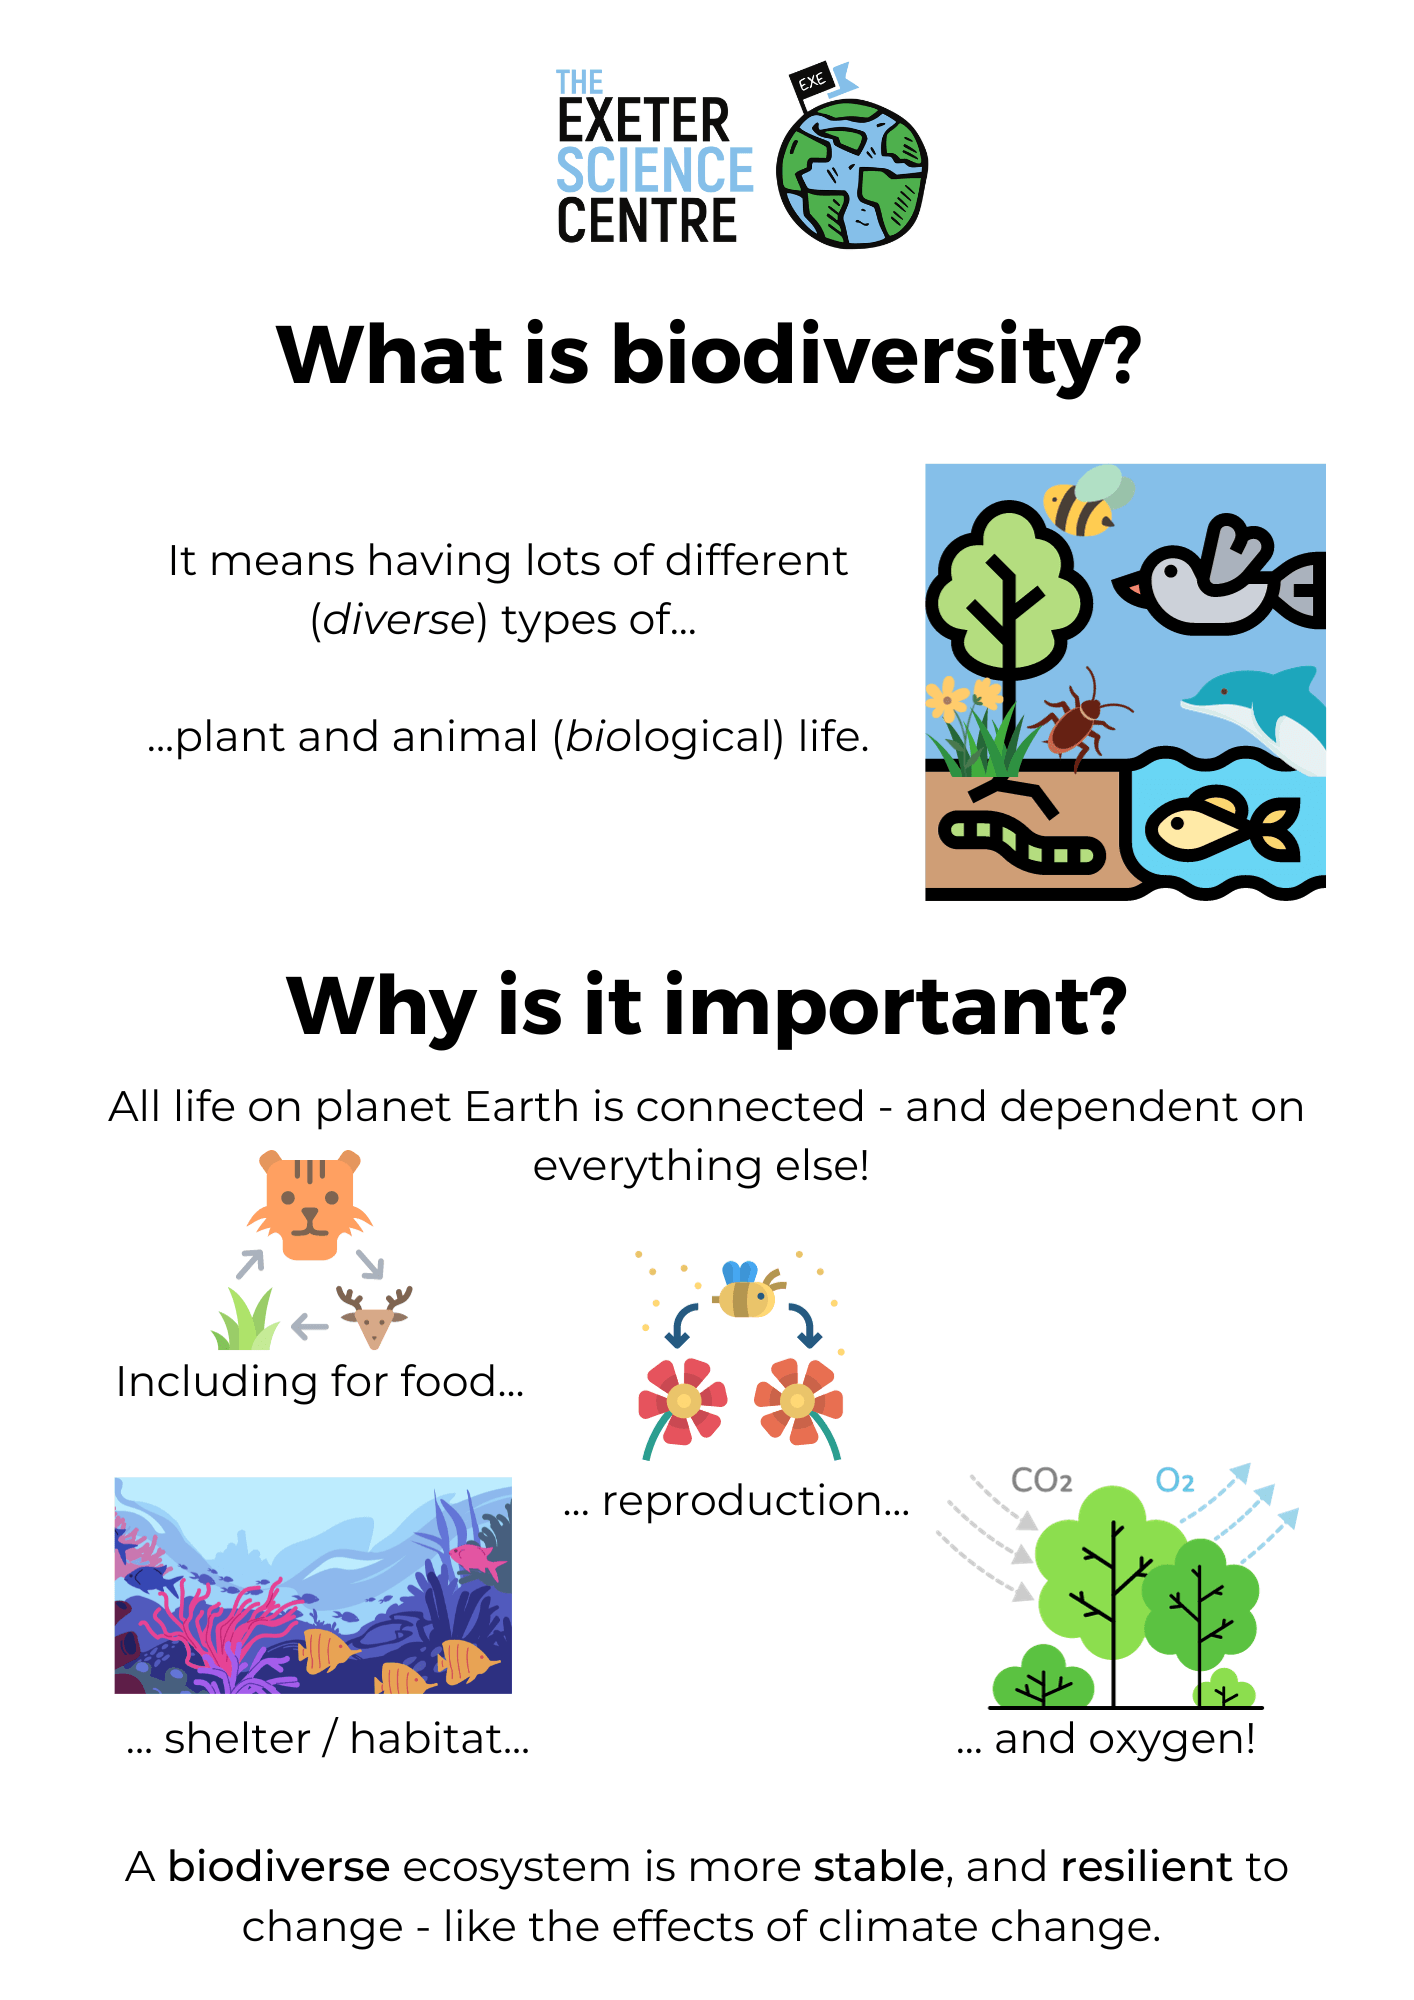 What is biodiversity? It means having lots of different (diverse) types of plant and animal (biological) life. Why is it important? All life on planet Earth is connected - and dependent on everything else! Including for food... reproduction... shelter/habitat... and oxygen! A biodiverse ecosystem is more stable and resilient to change - like the effects of climate change.